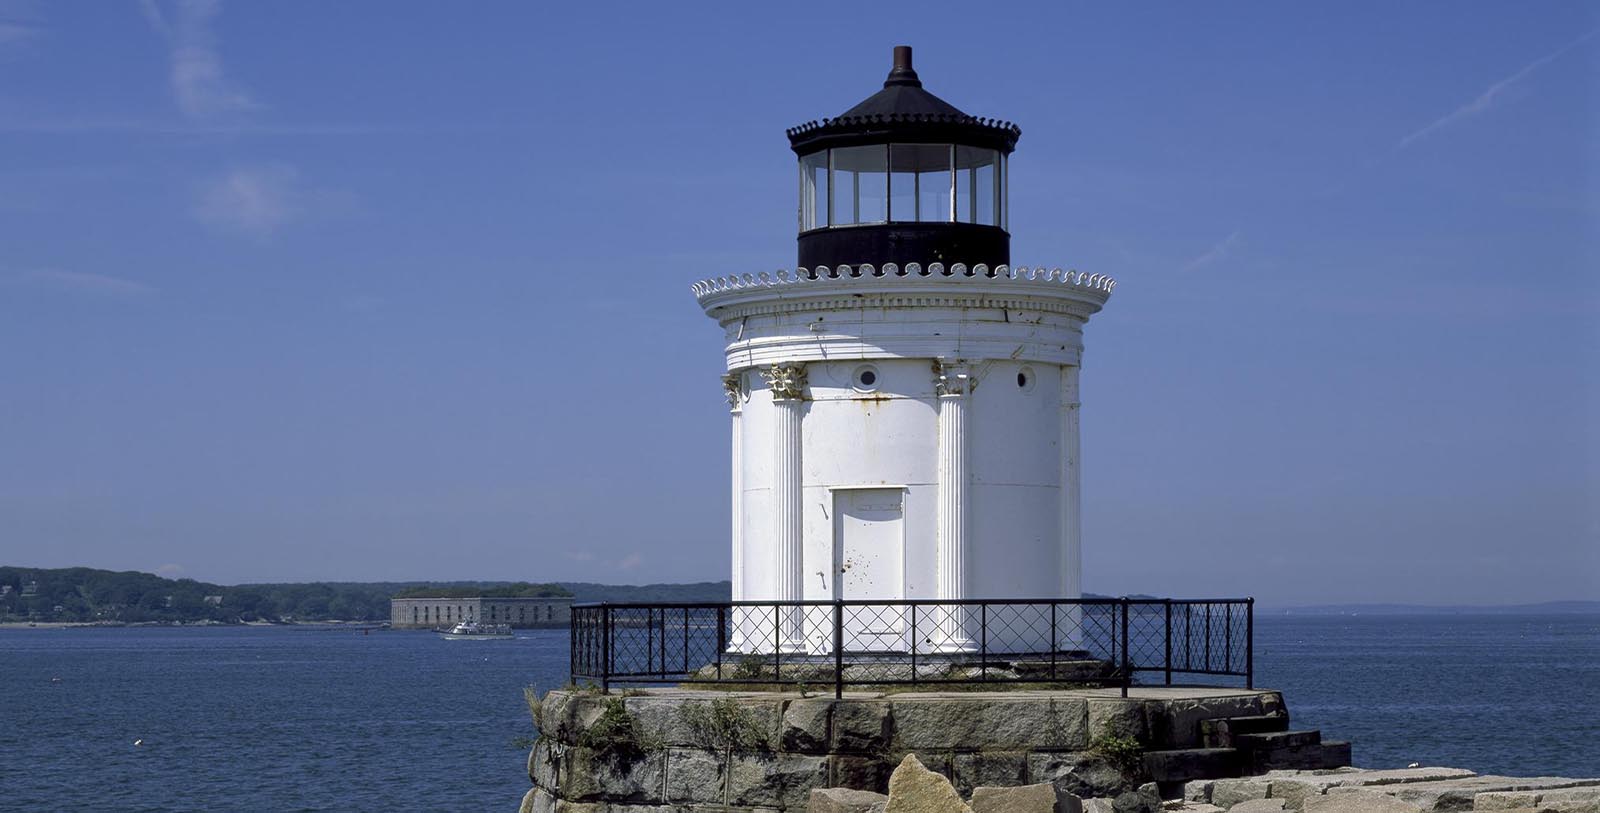 Explore tiny lighthouses, such as the 20 ft. tall Bug Light, shown here, or Great Diamond Island's 6 ft. Echo Point Lighthouse, the smallest lighthouse registered with the U.S. Coast Guard.